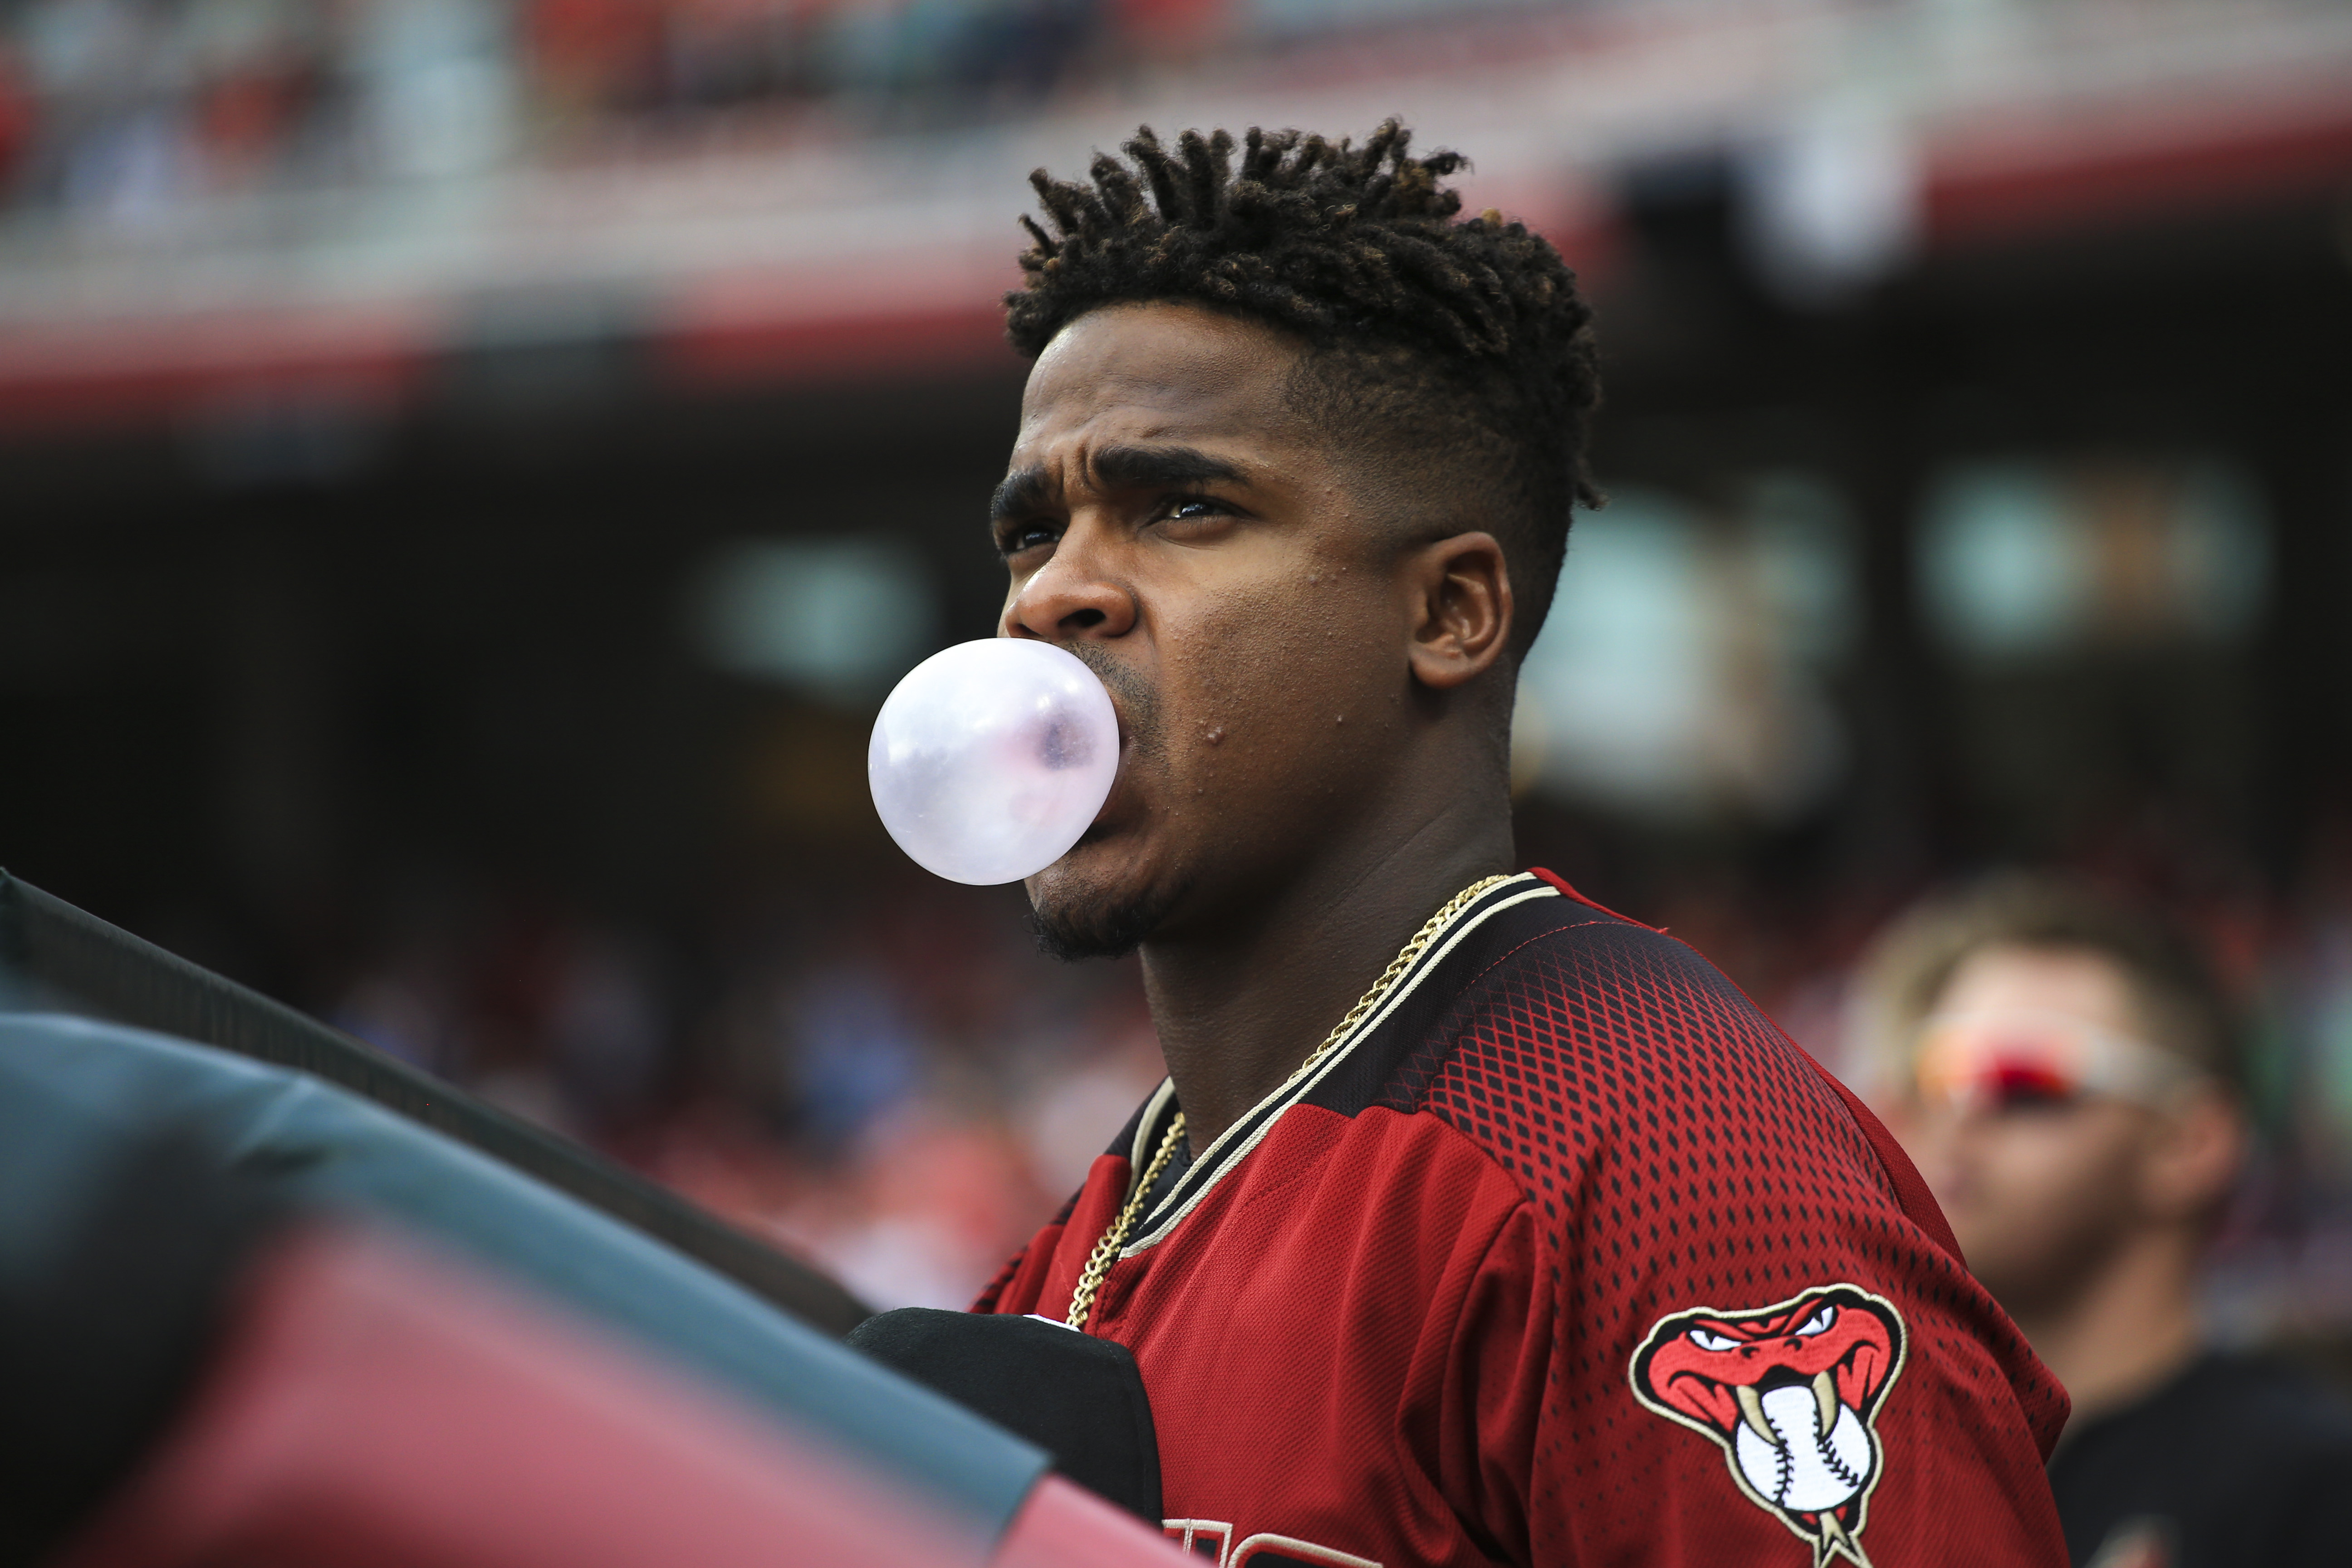 Domingo Leyba blows a bubble at Great American Ball Park.